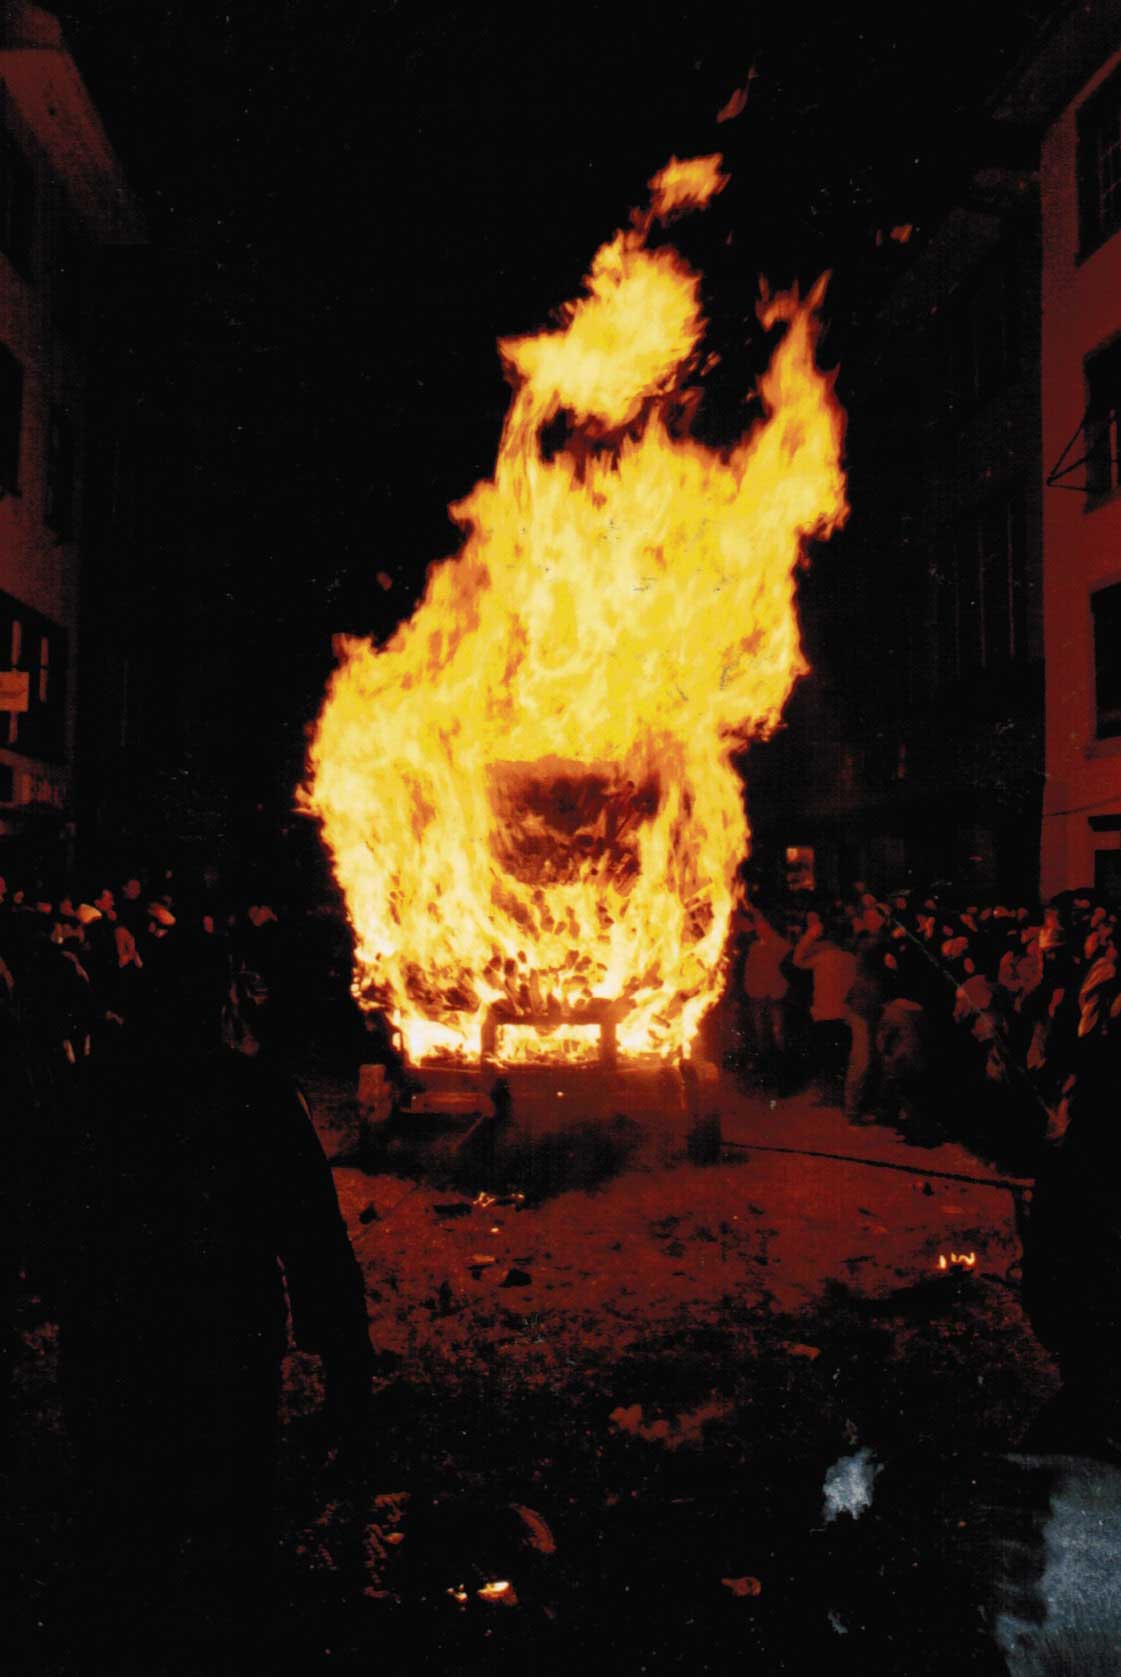 The crowd recoiling as they are met with the infernal heat of the burning cart, 2004 © Hanspeter Meyer